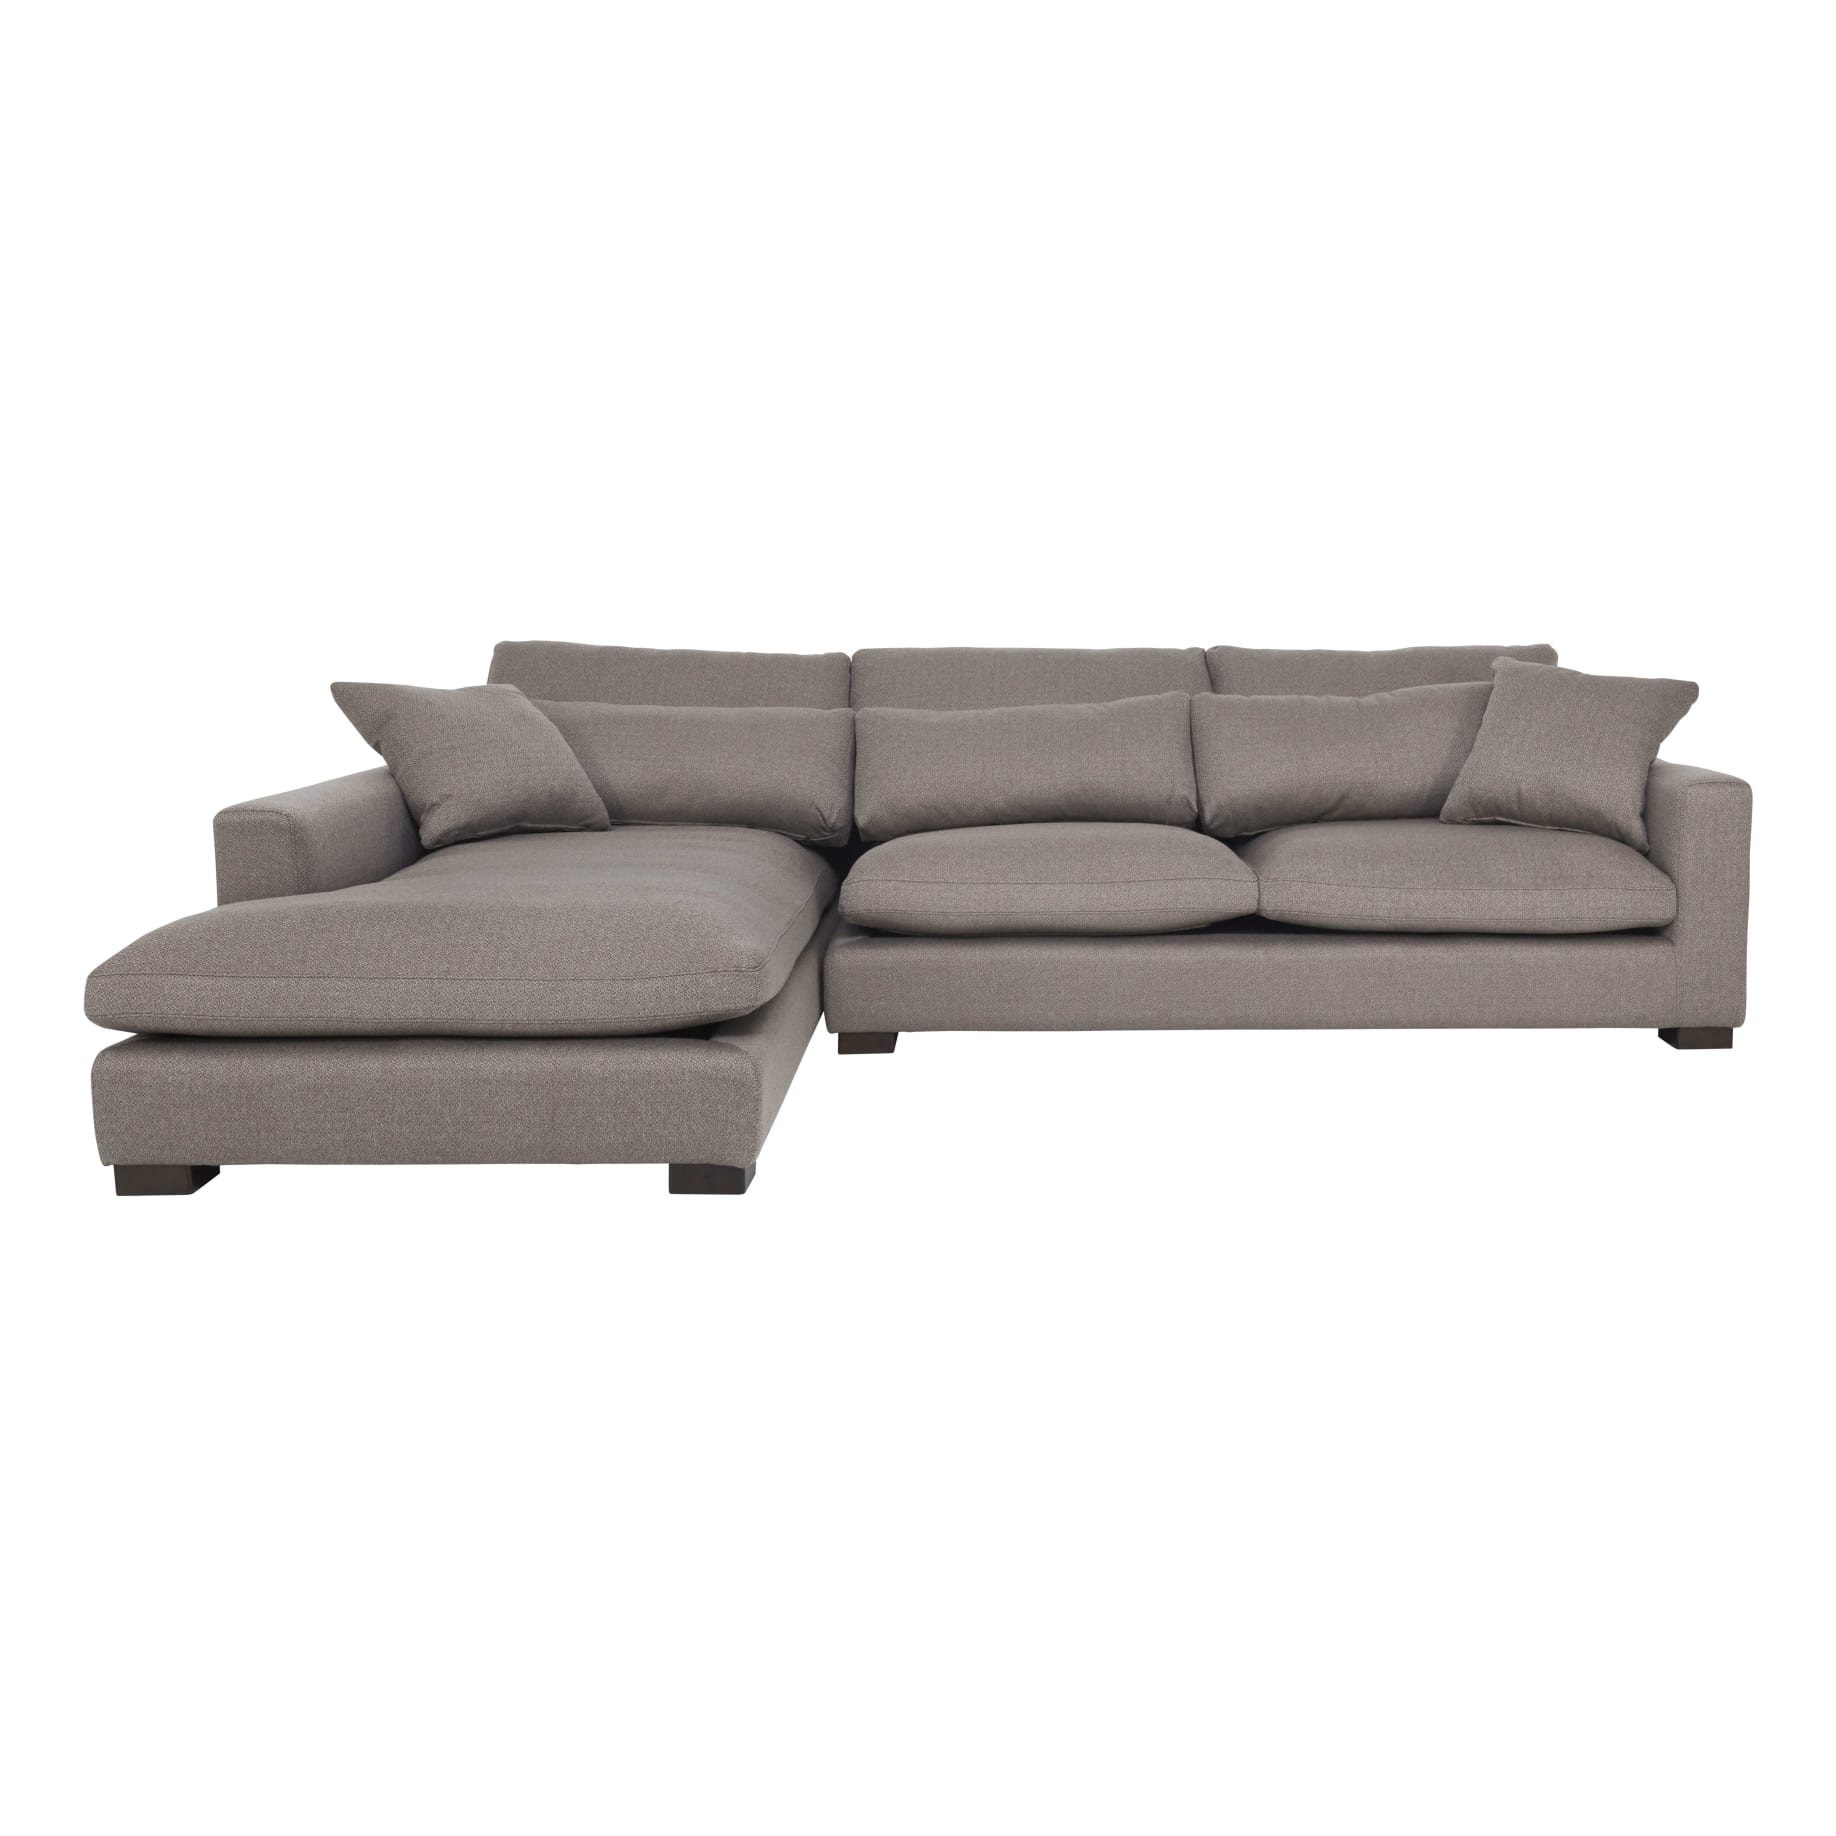 Cleo 3 Seater Sofa + Chaise LHF in Gusto Taupe